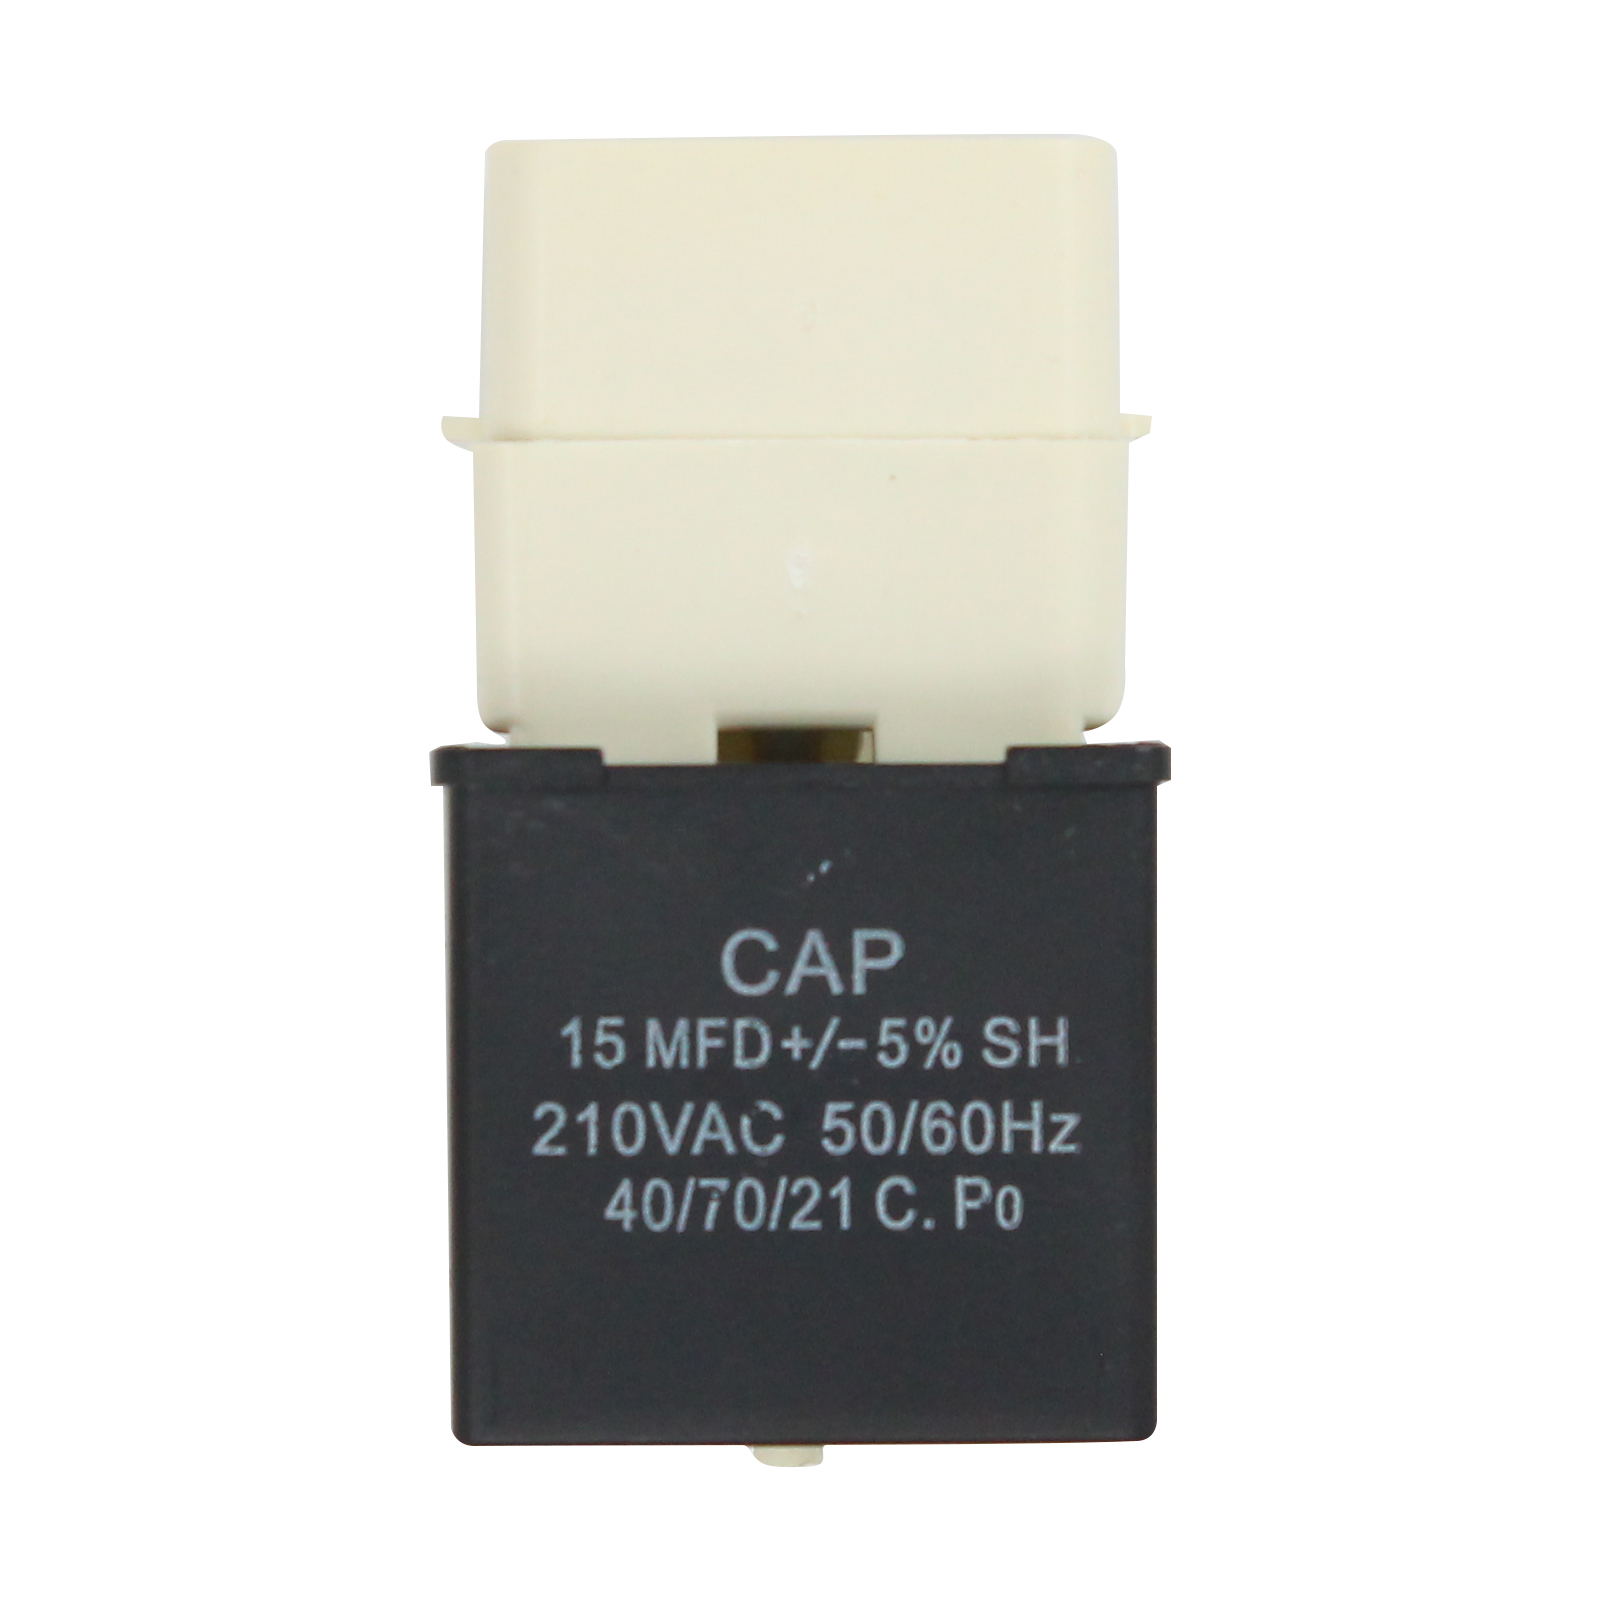 W10613606 Refrigerator Compressor Start Relay & Capacitor Replacement for Maytag MBB1952HEW Refrigerator - Compatible with W10613606 Start Device Relay Overload With Capacitor - image 2 of 4